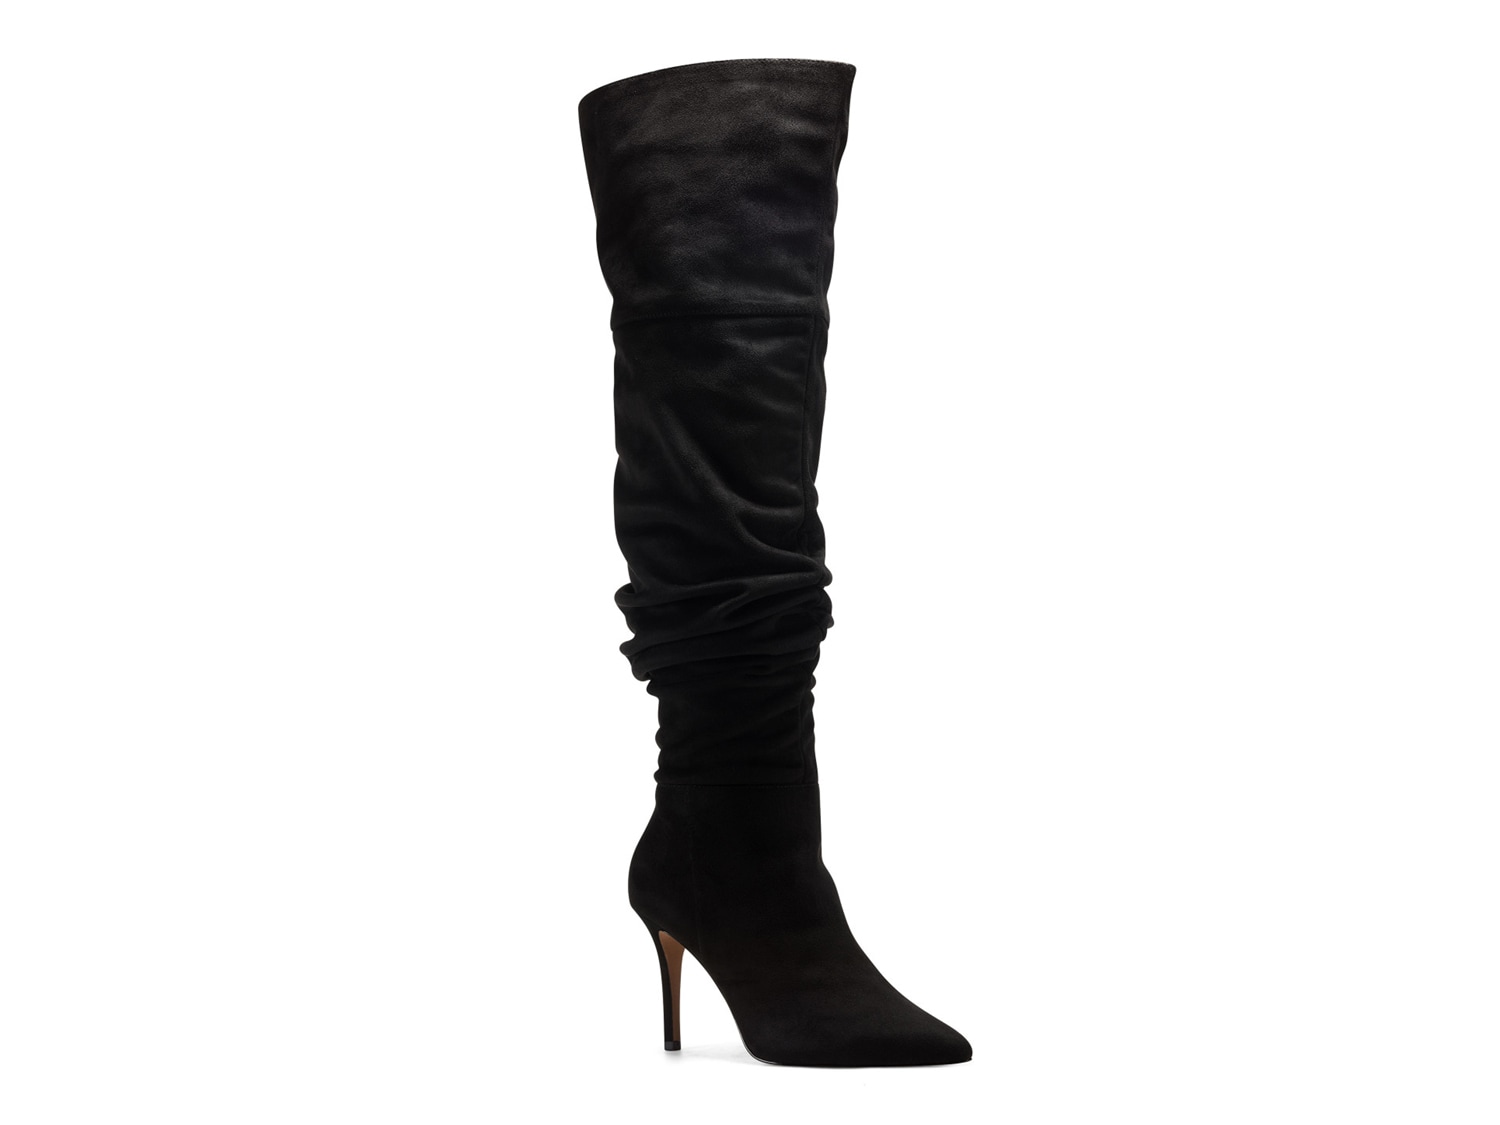 Jessica Simpson Aleta Over-the-Knee Boot - Free Shipping | DSW